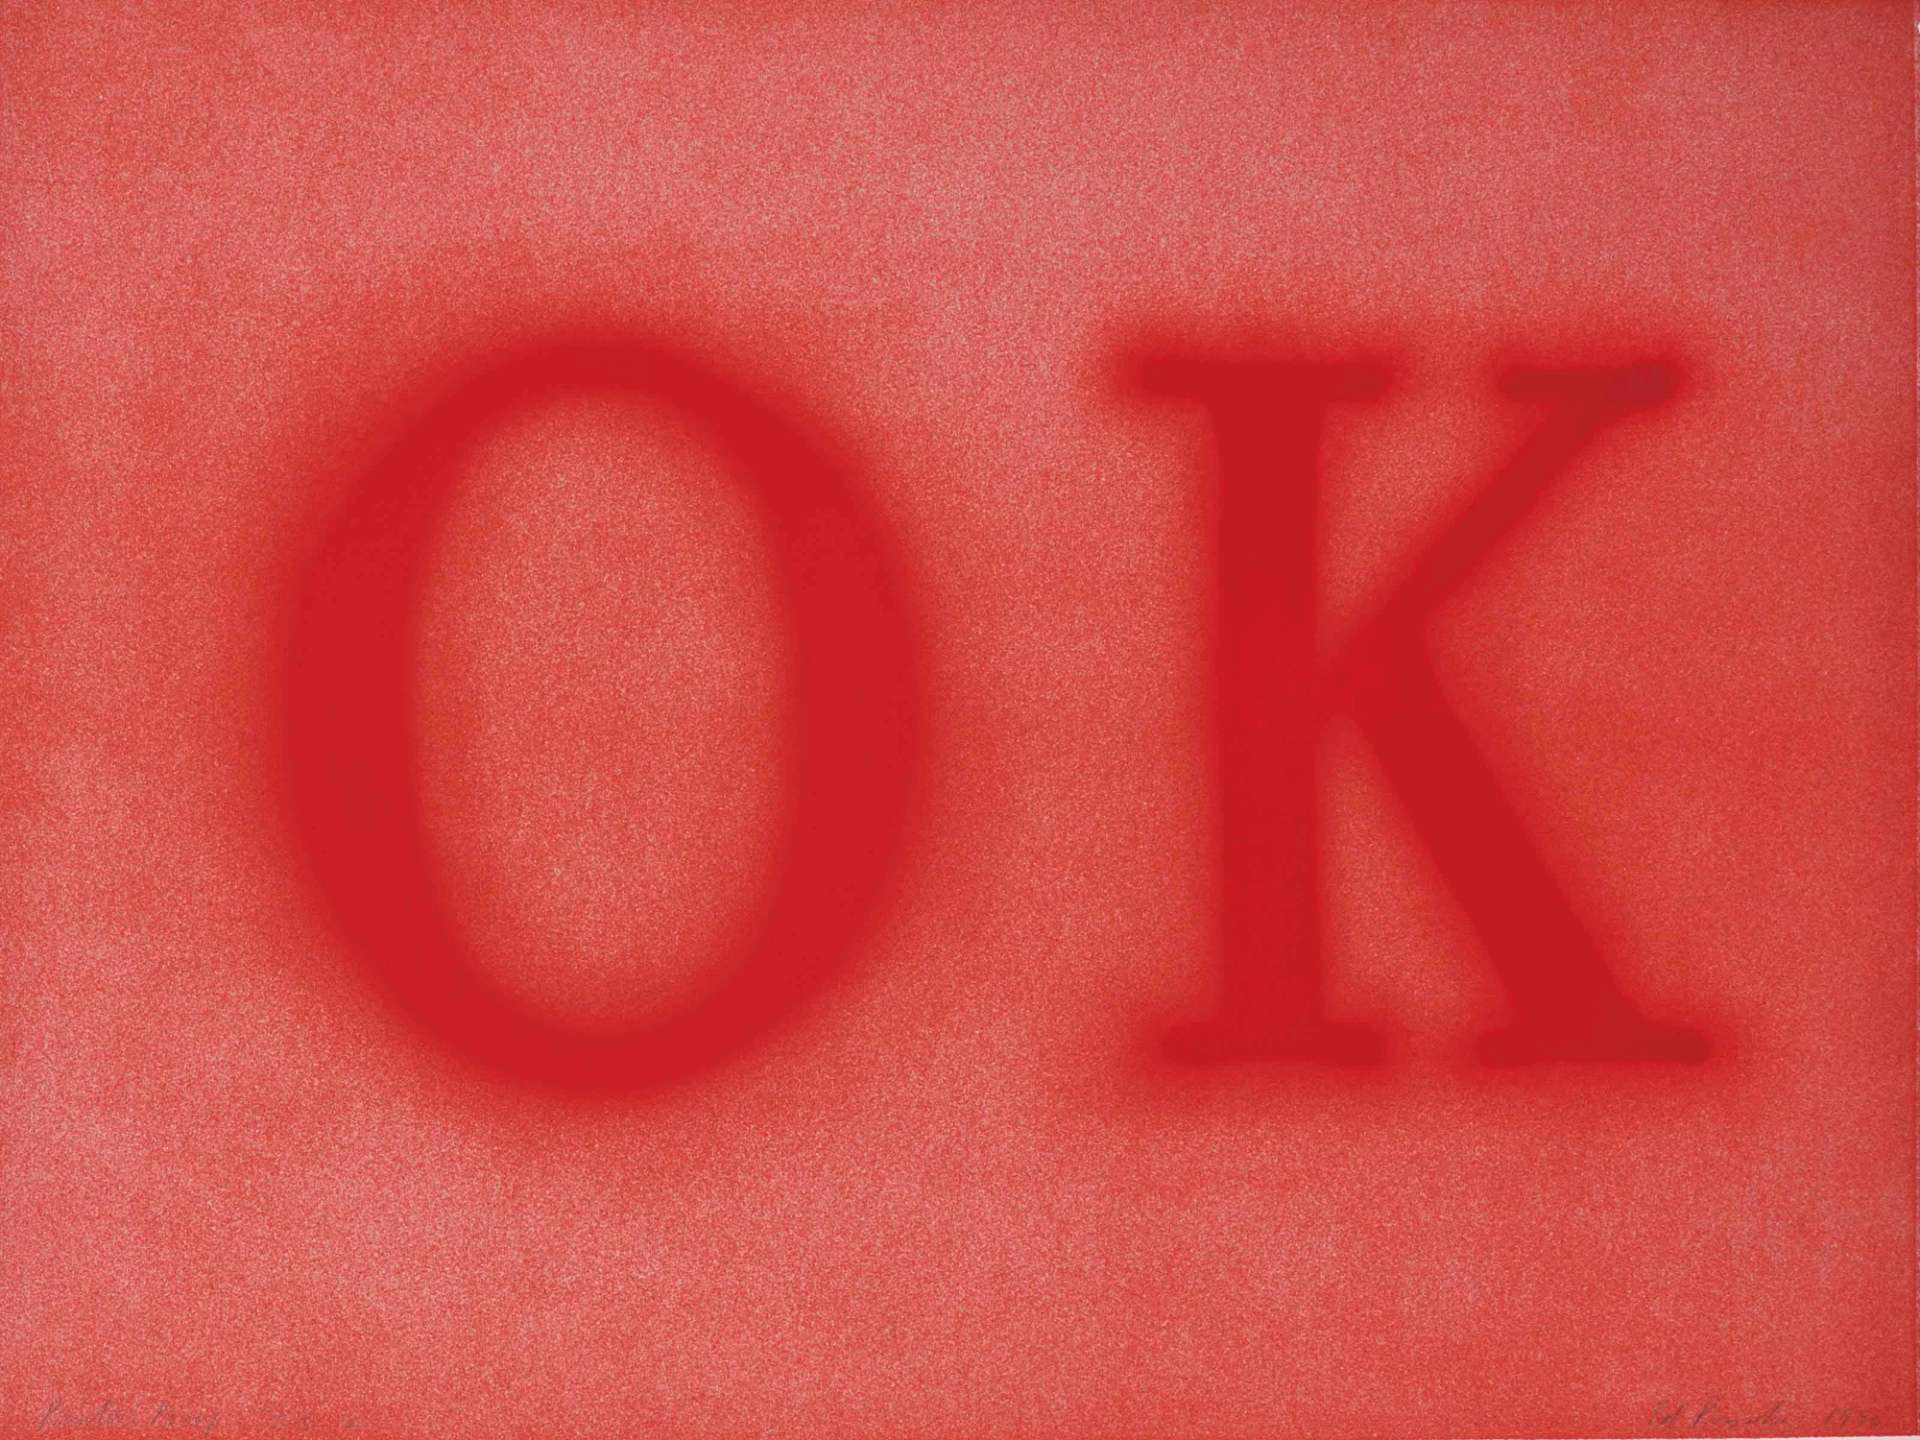 Lithograph in red by Ed Ruscha, depicting the word 'OK' in a brilliant red against a lighter red, grainy background.